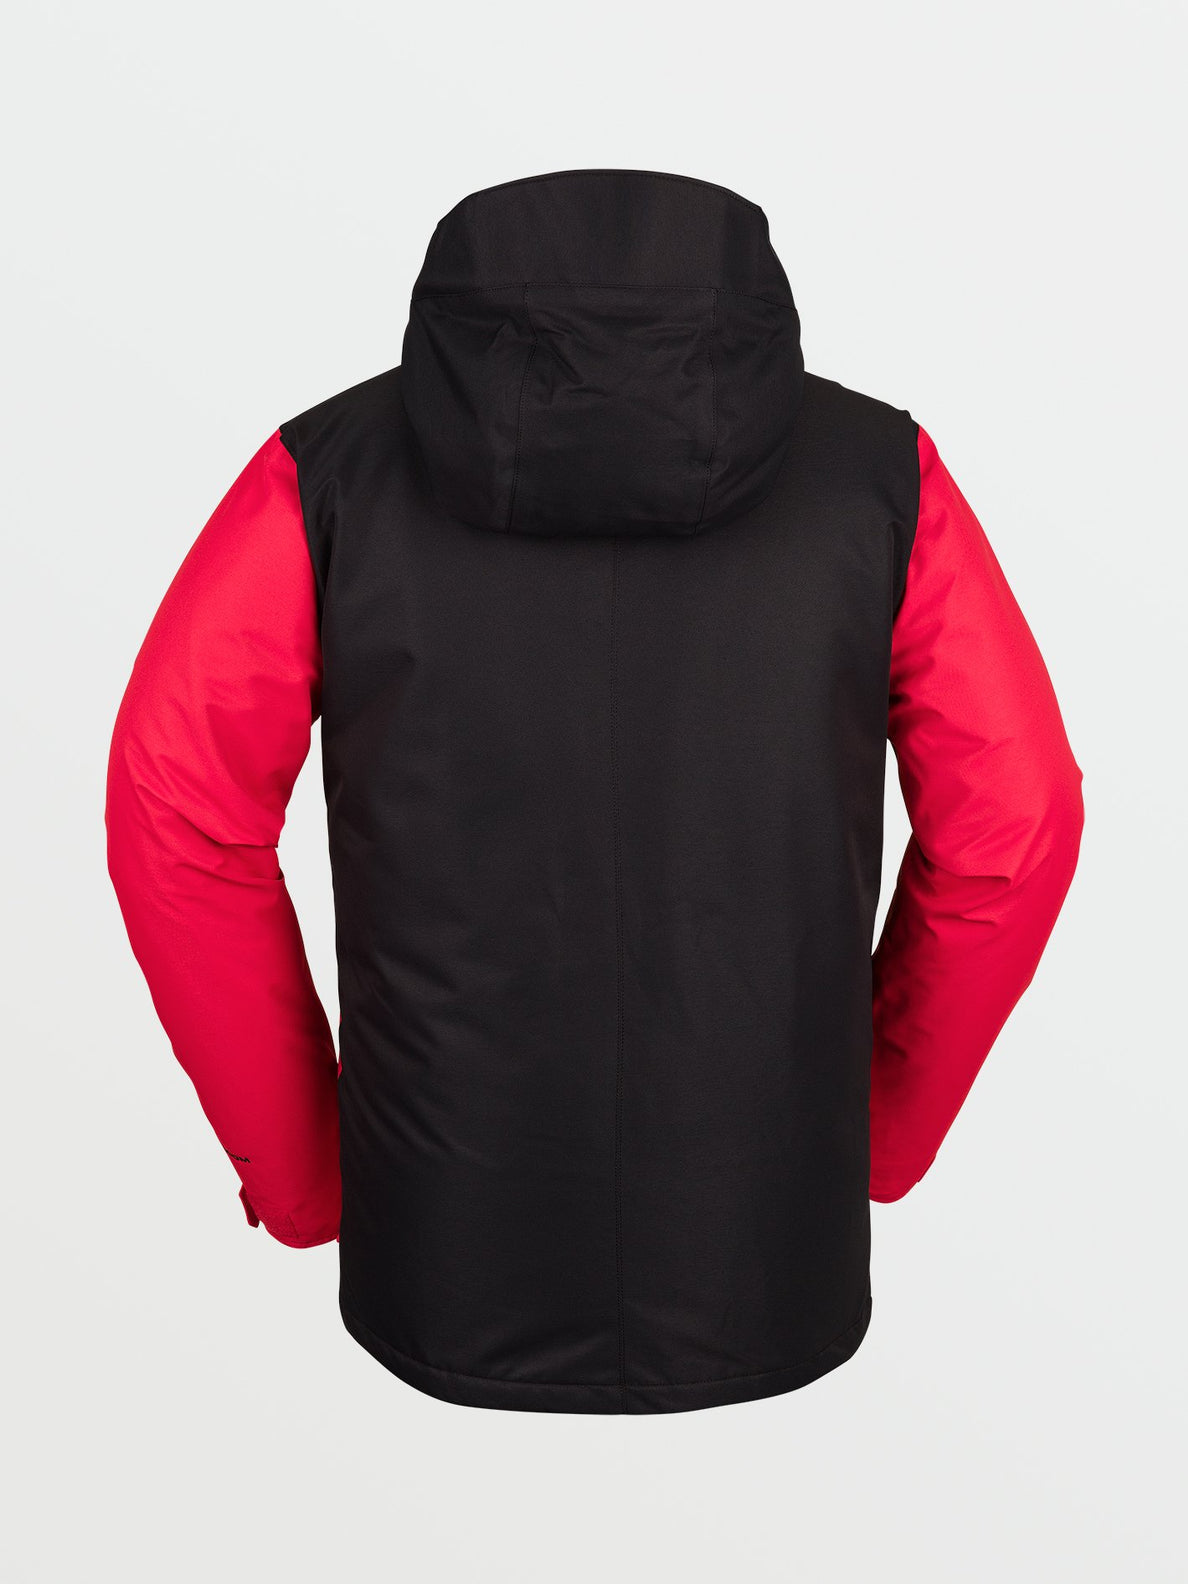 17Forty Insulated Jacket - RED COMBO (G0452114_RDC) [B]